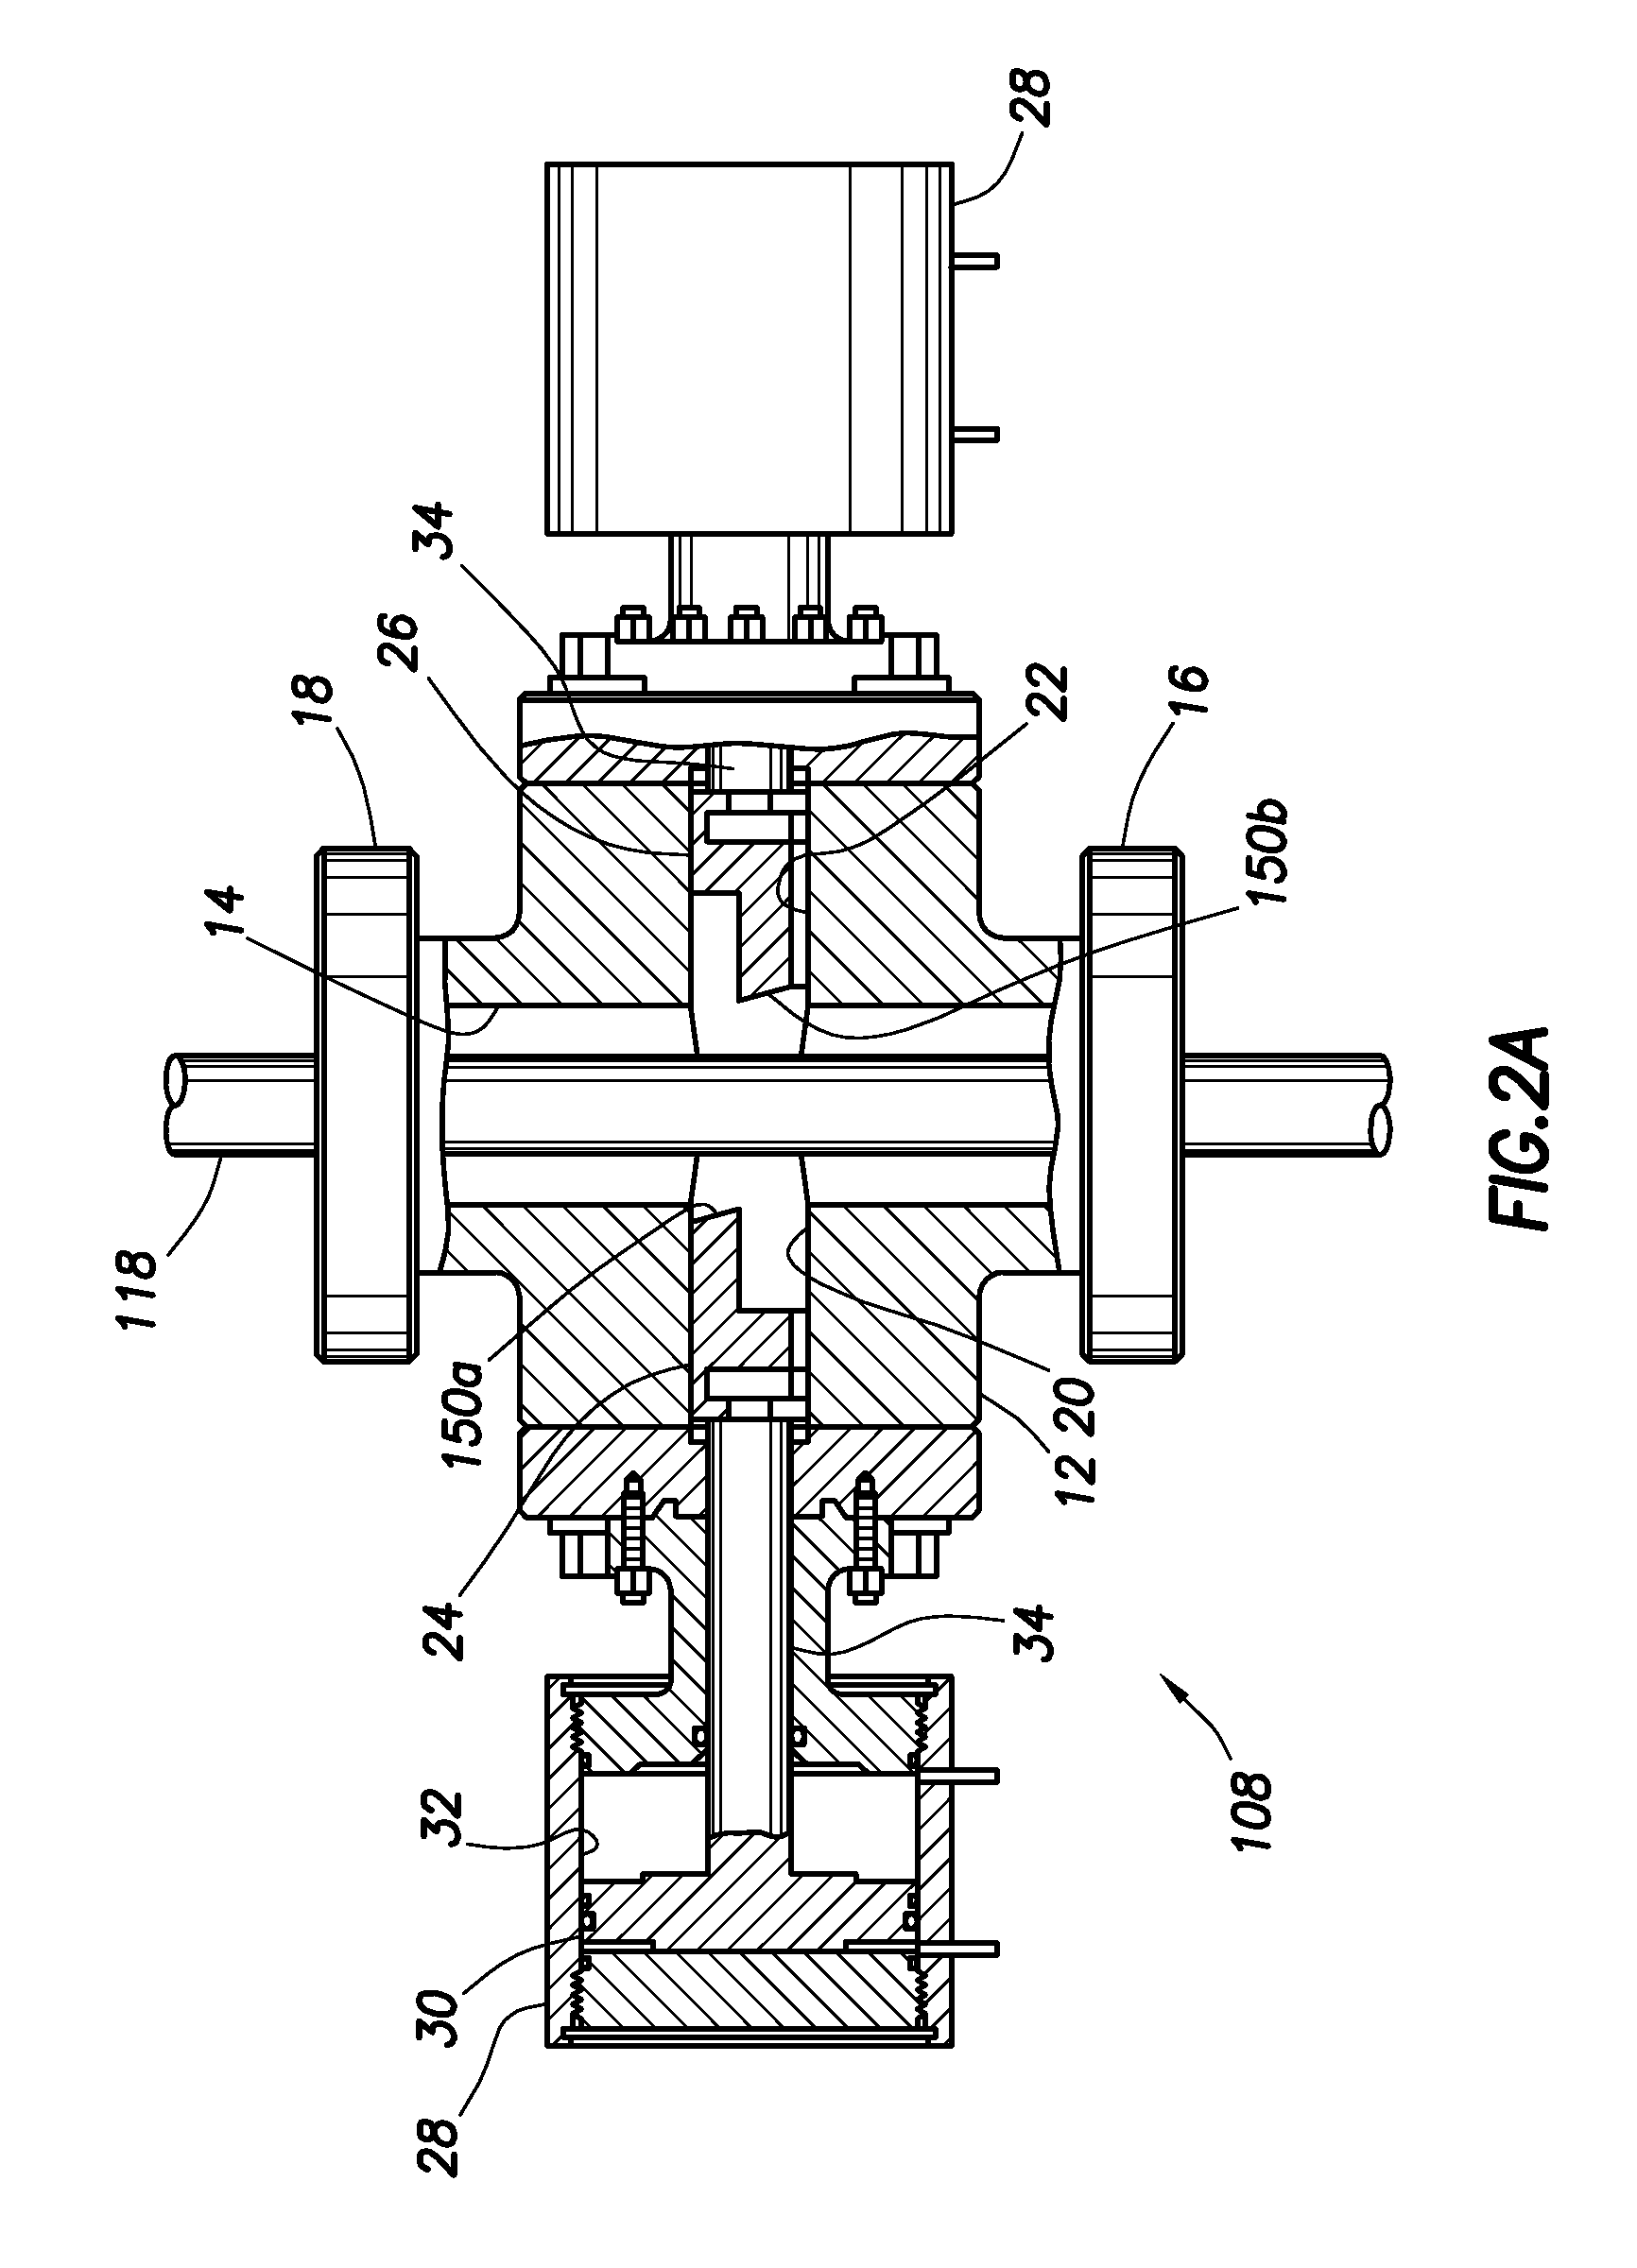 Tubular severing system and method of using same